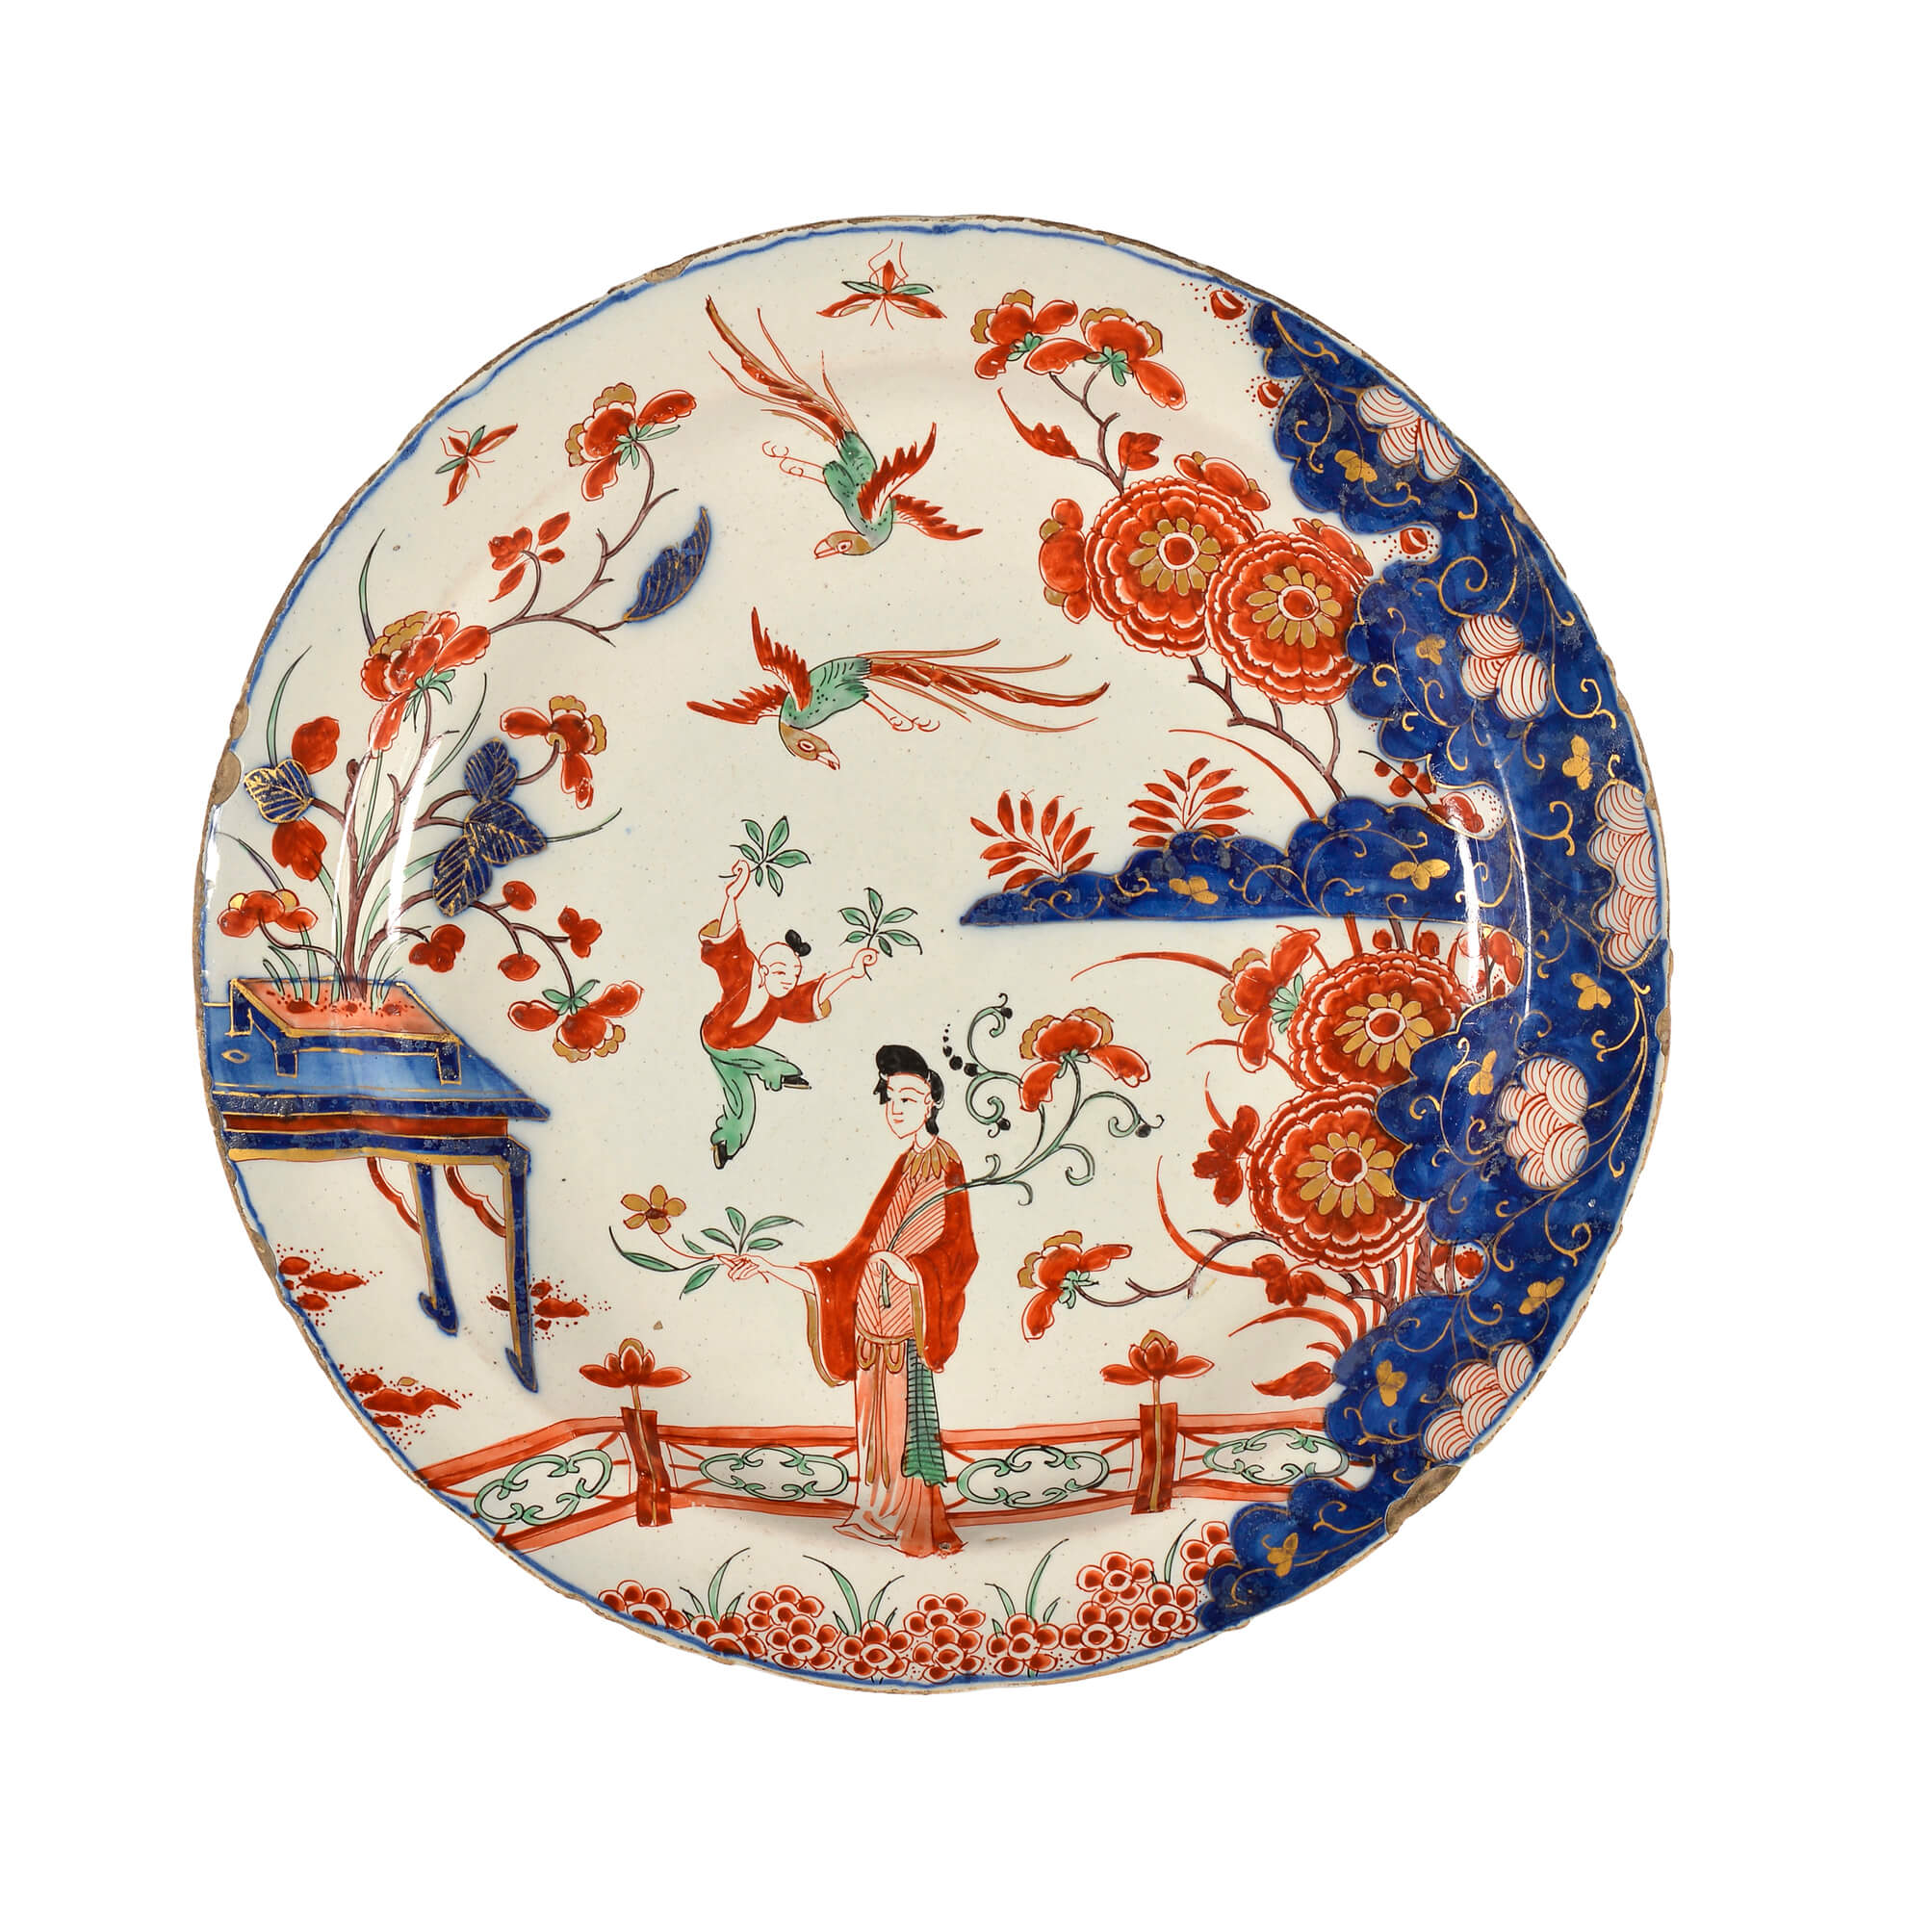 Antique Ceramic with Japanese Colour patterns